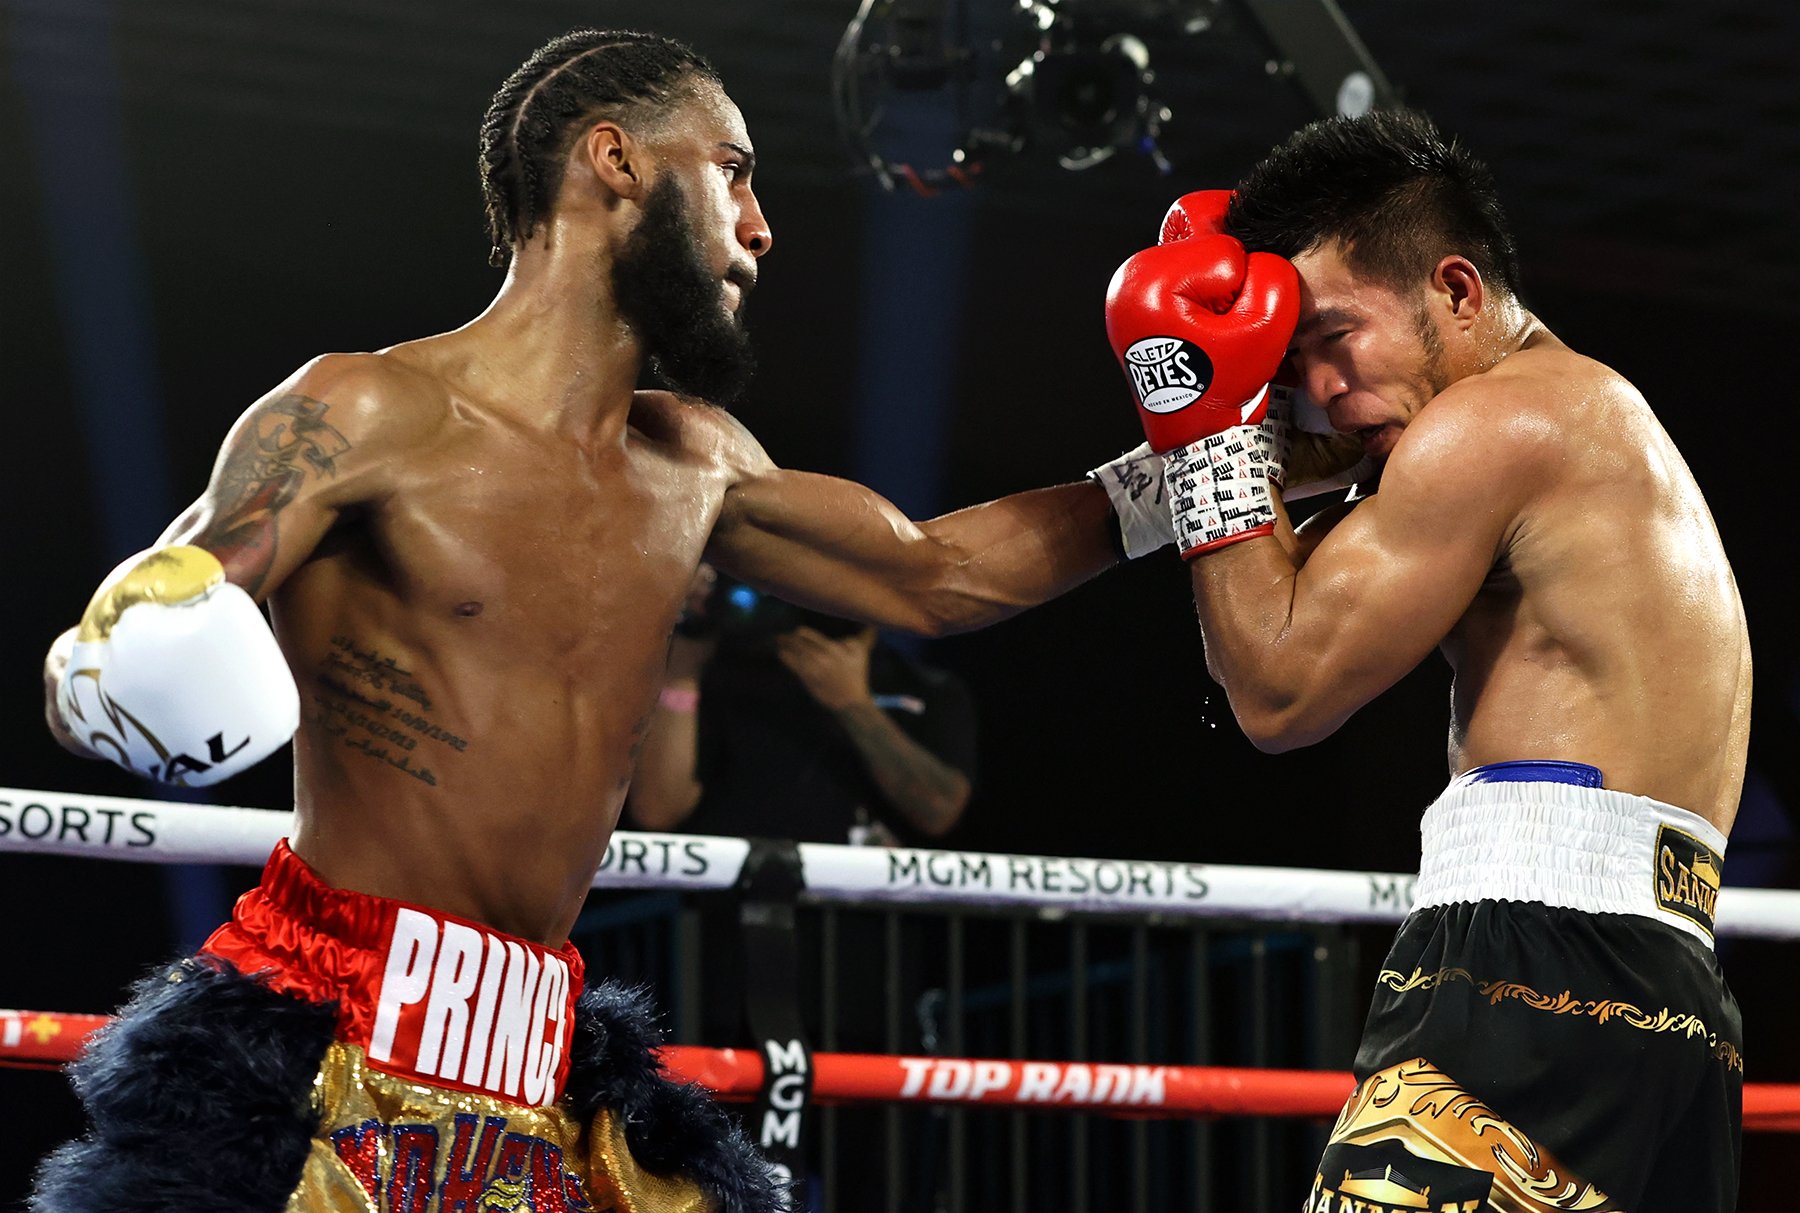 Albert Bell takes on Jonathan Romero in homecoming bout with a title shot in sight